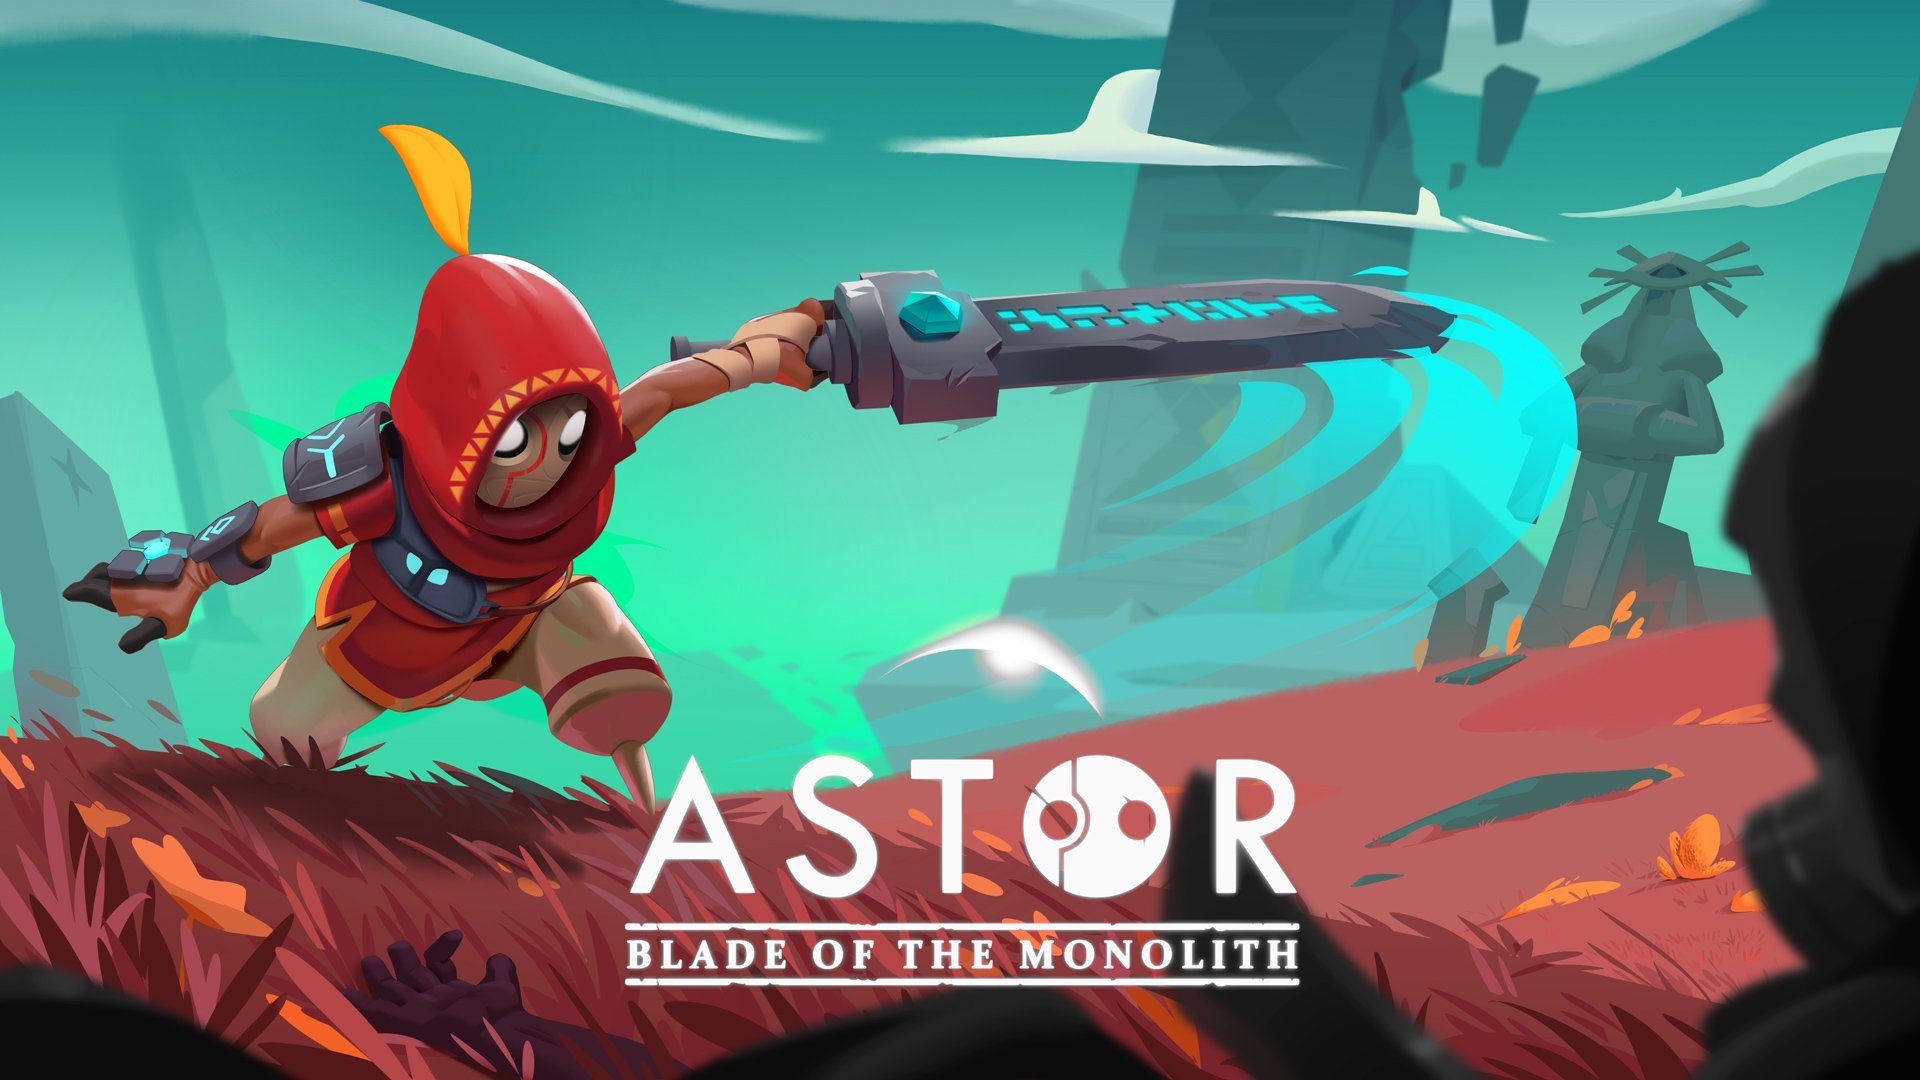 #
      Monolith: Requiem of the Ancients rebranded to Astor: Blade of the Monolith